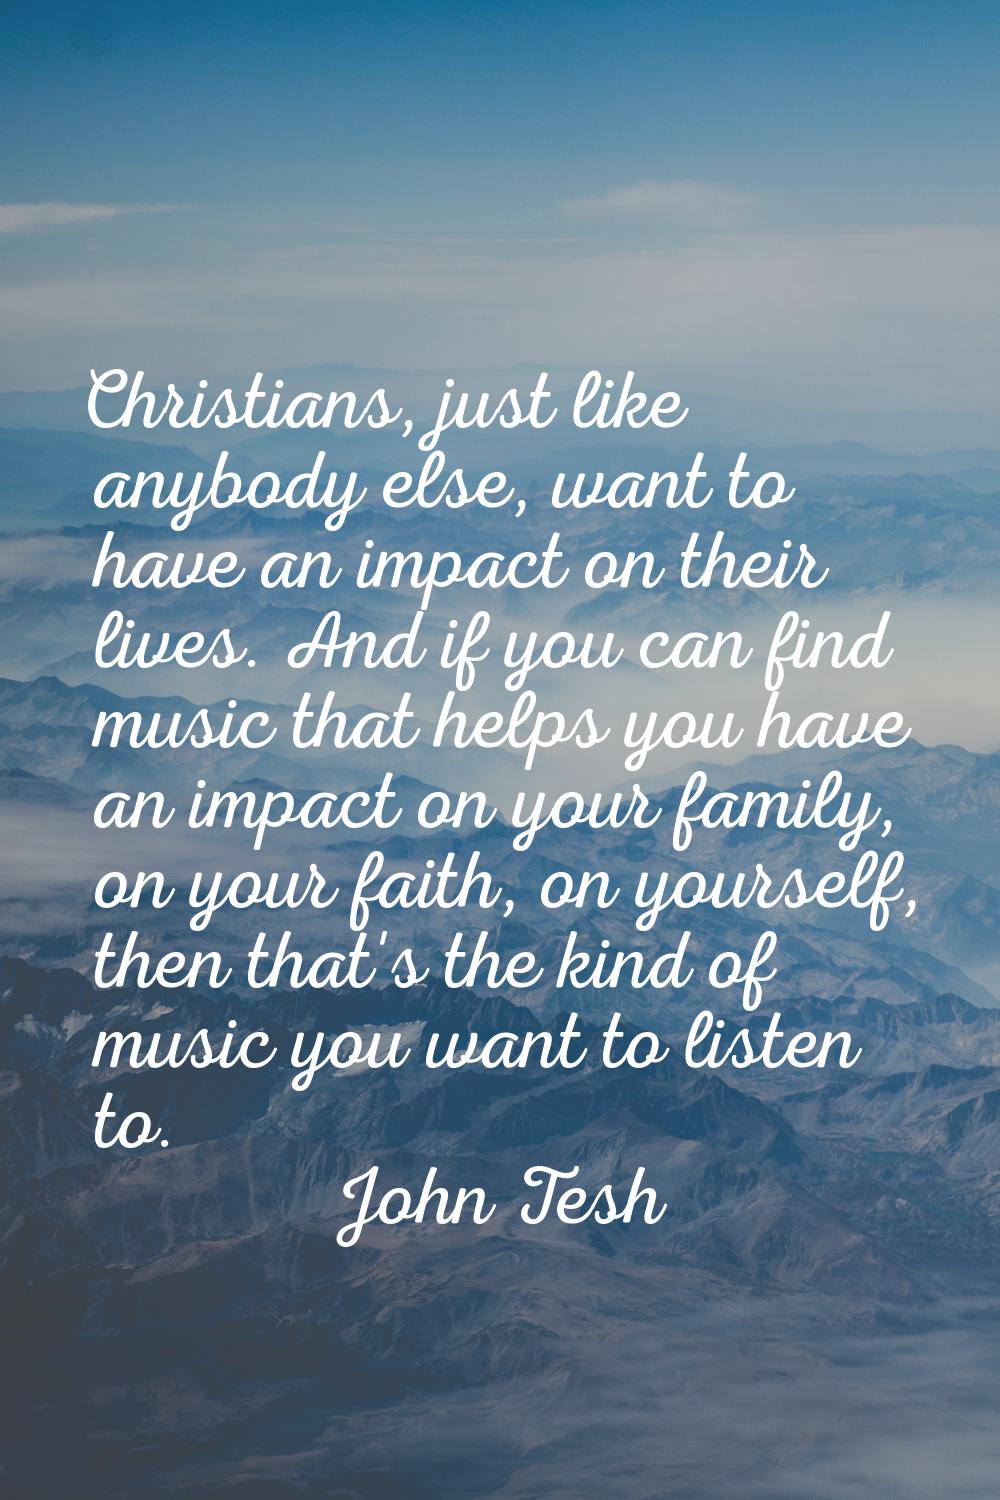 Christians, just like anybody else, want to have an impact on their lives. And if you can find musi